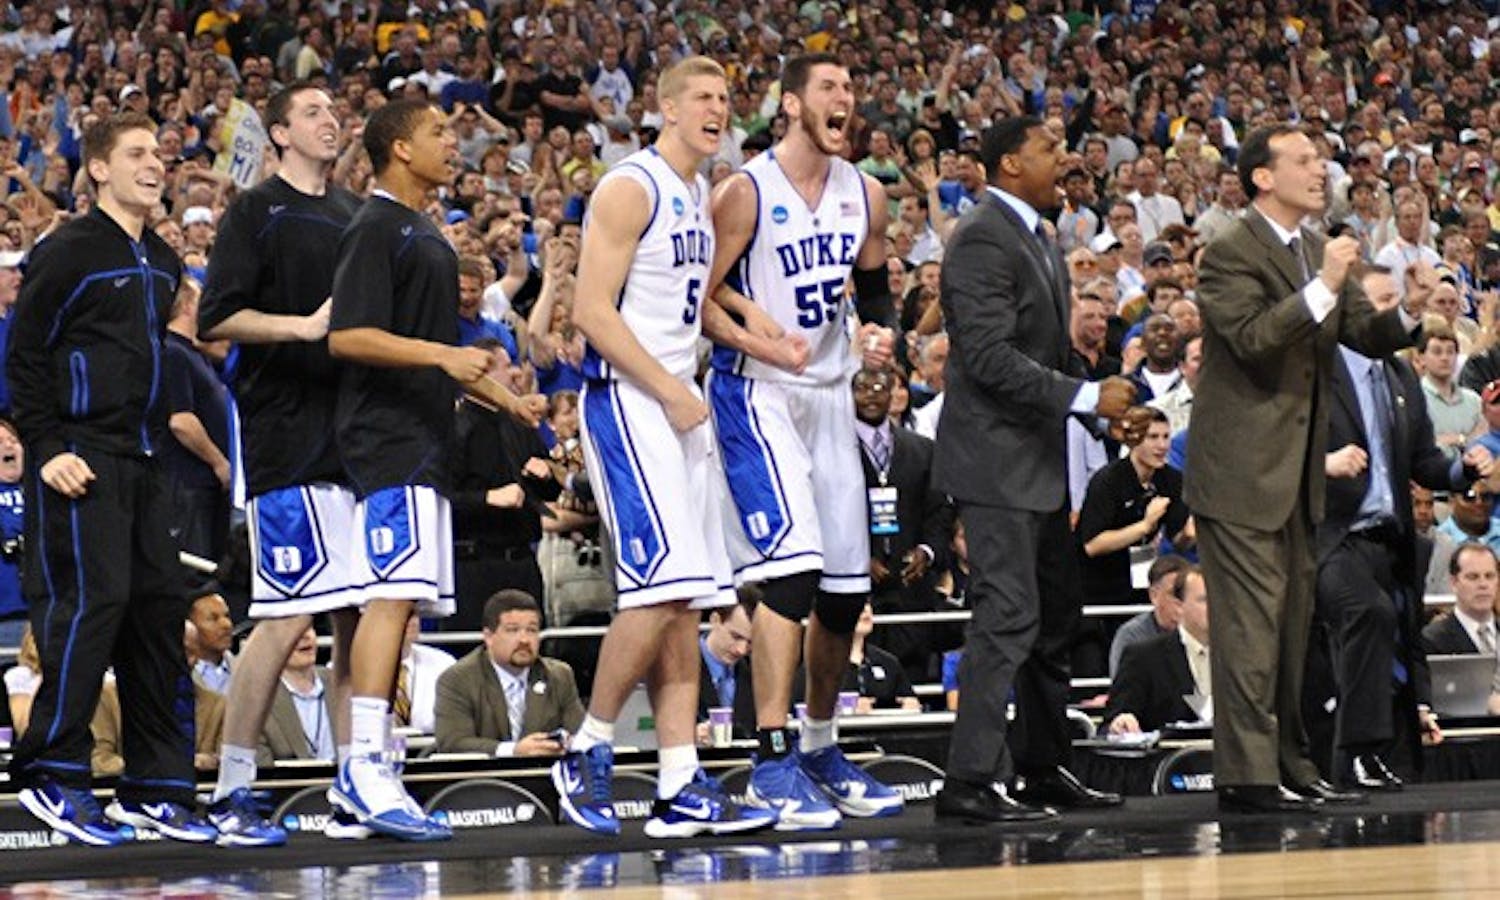 Duke, shown here celebrating after its win over Baylor, found a unique identity as its season progressed, senior Ben Cohen writes.